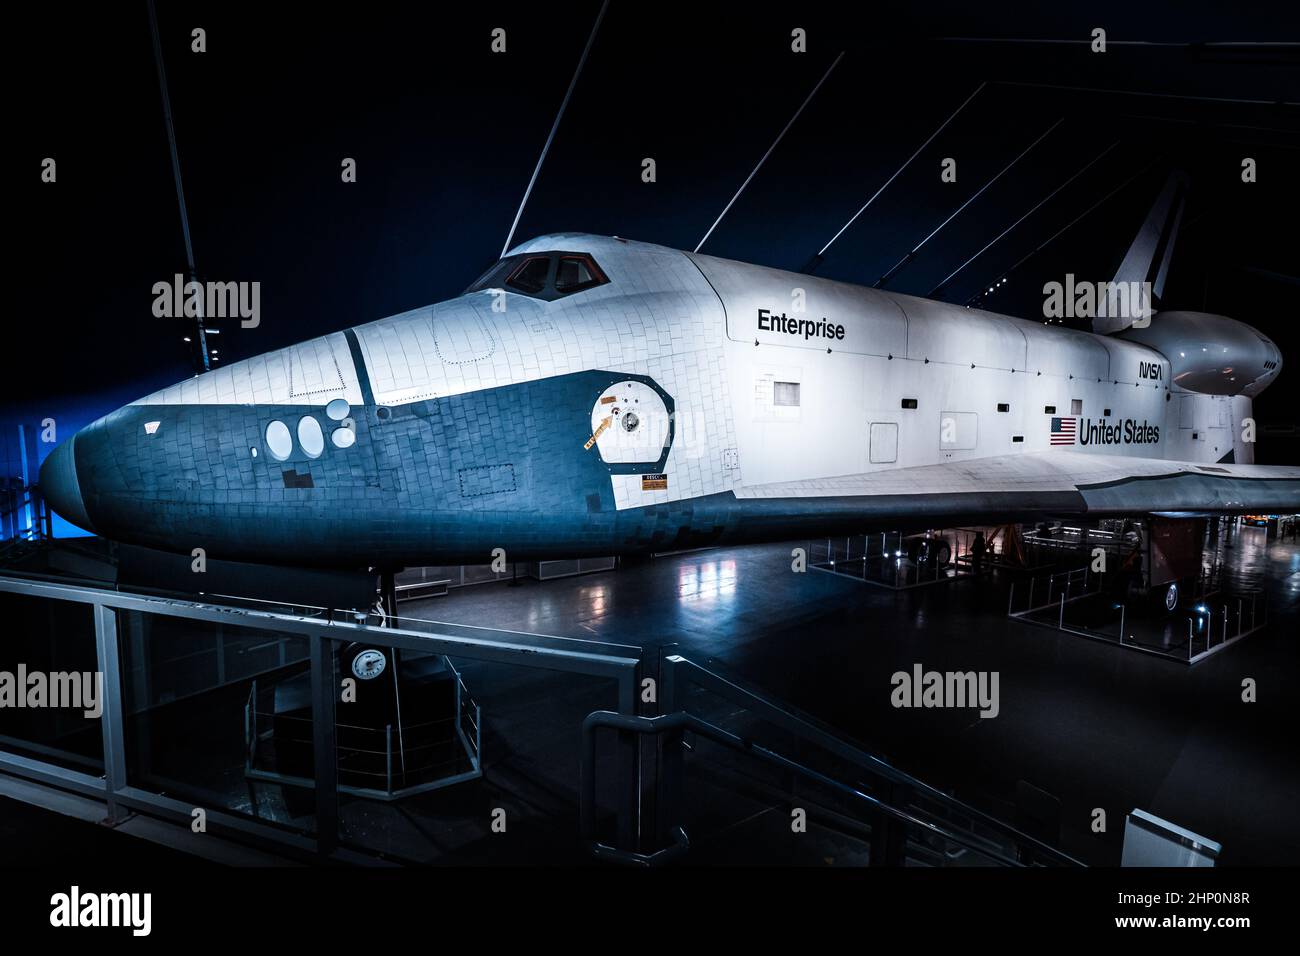 Side view of Space Shuttle Enterprise at the Shuttle Pavilion onboard of the USS Intrepid Sea, Air and Space Museum in New York City, NY, USA Stock Photo